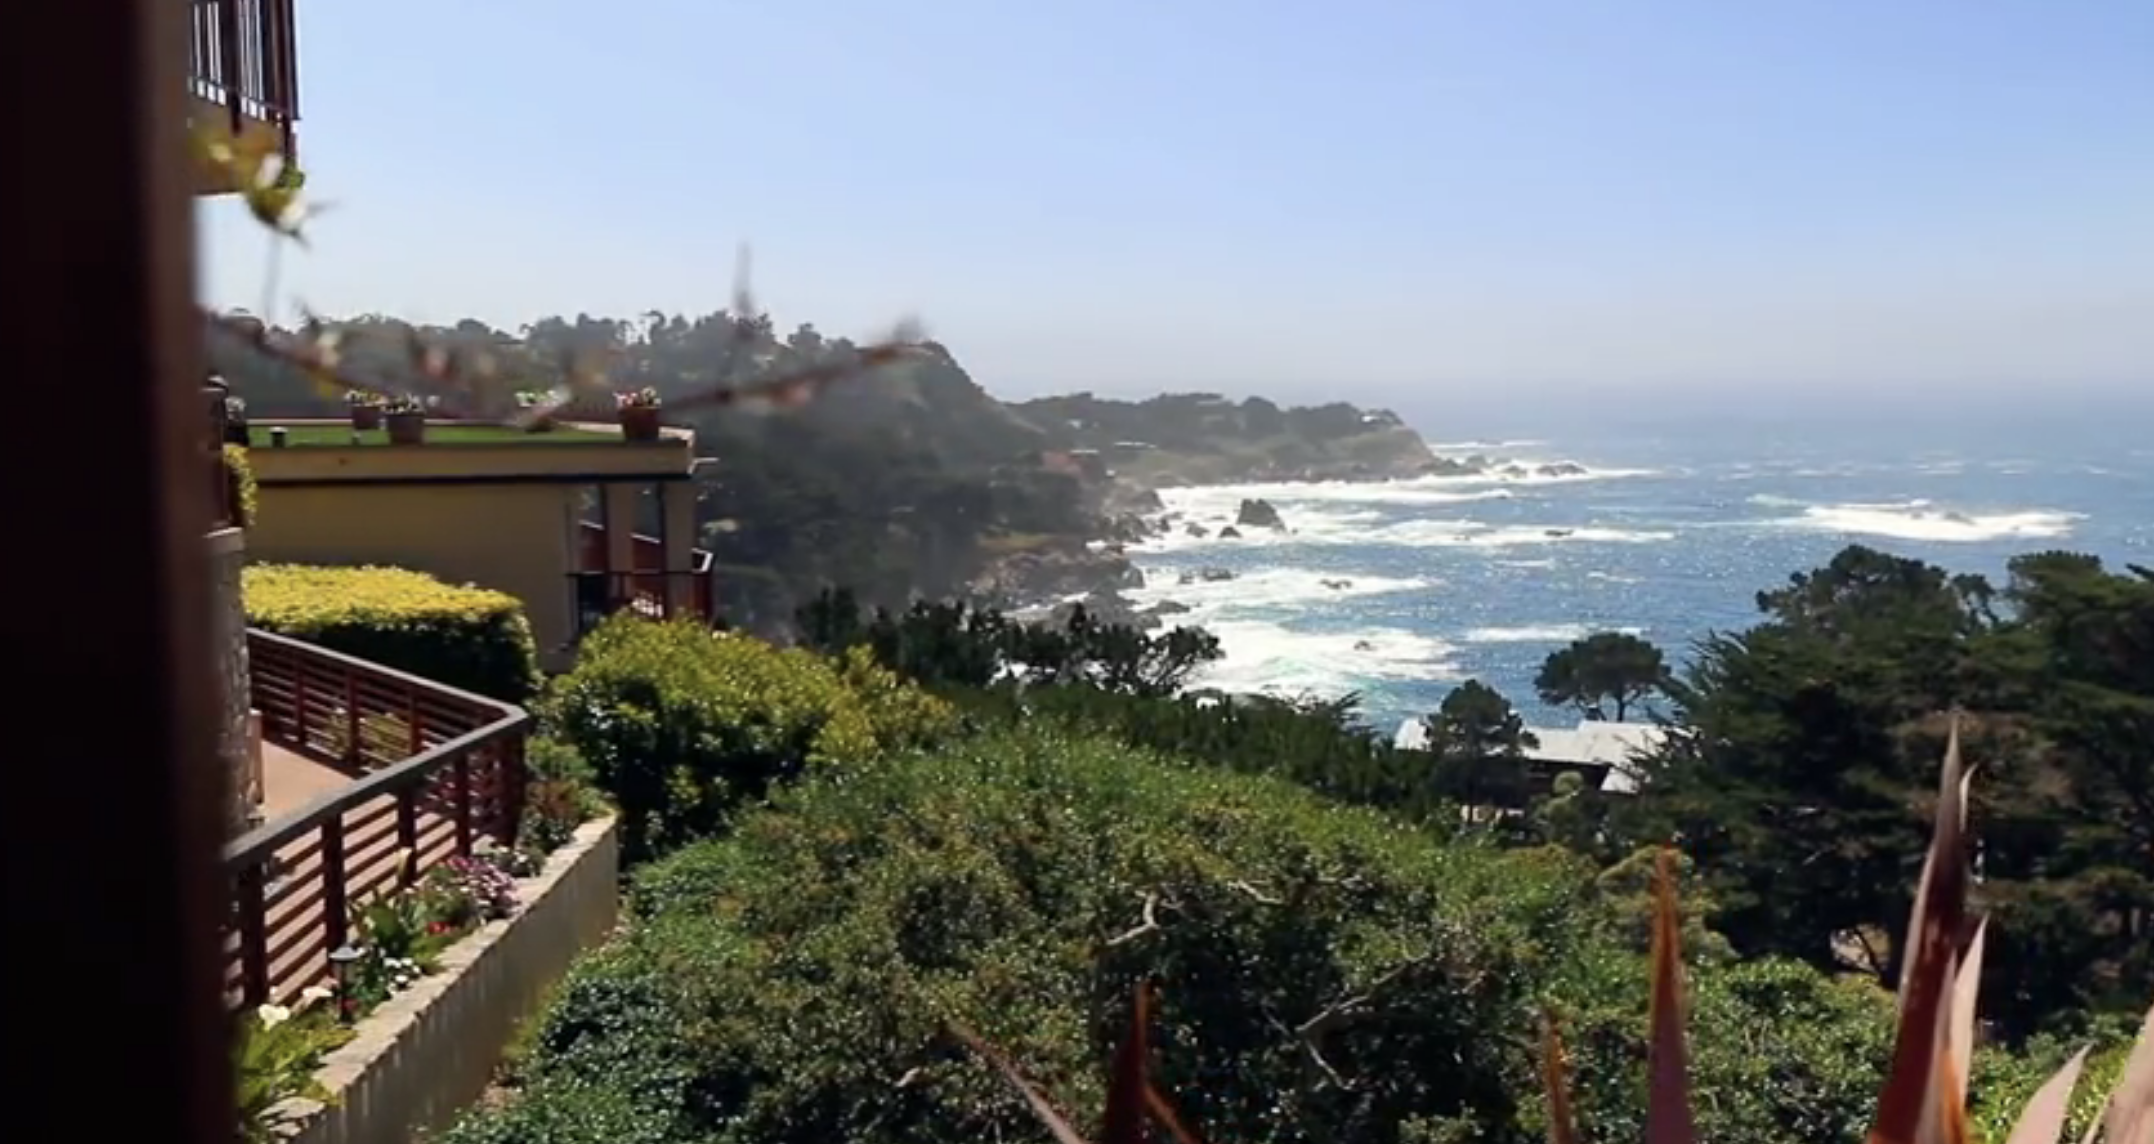 A view of cliffs by the Pacific Ocean from a balcony at the inn